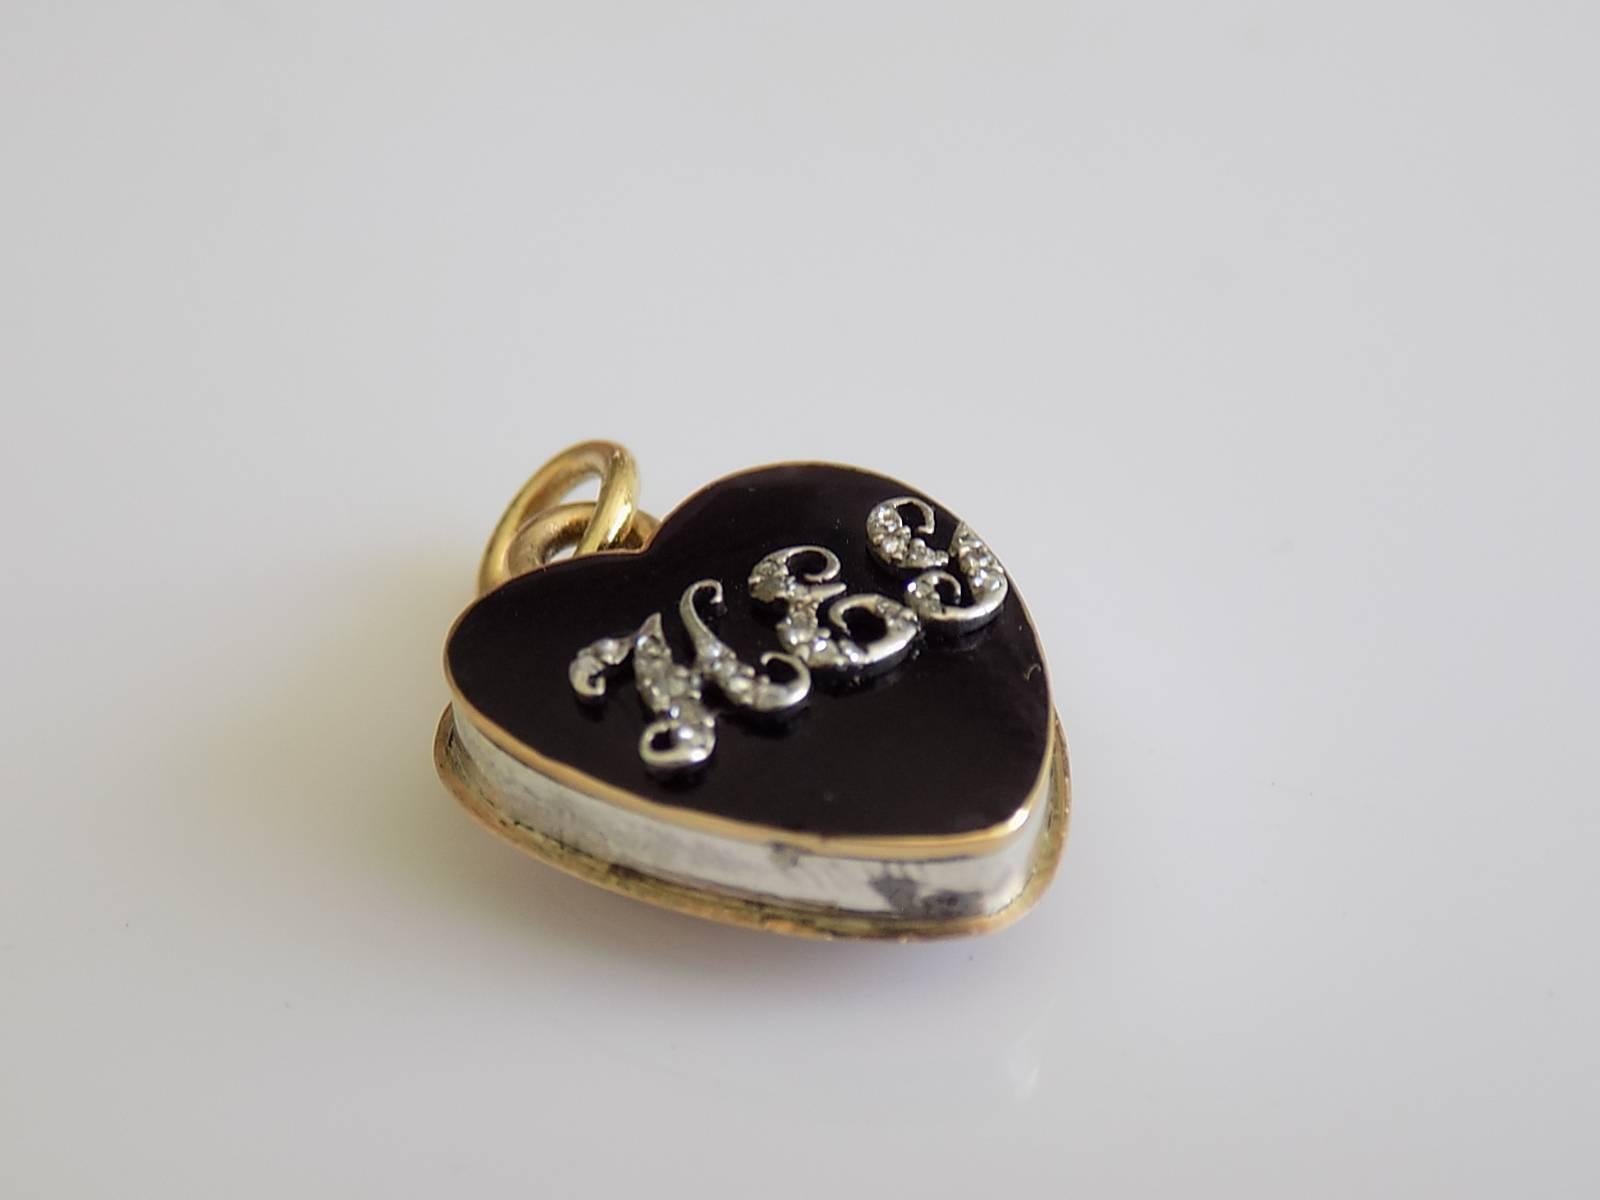 An One of a Kind Georgian c.1810 black enamel and rose cut Diamond heart locket pendant in Silver and Gold with initials HEG and filled with crystals. English origin.
Total drop including jump rings 18mm, width 14mm.
Unmarked, tested Silver and 18